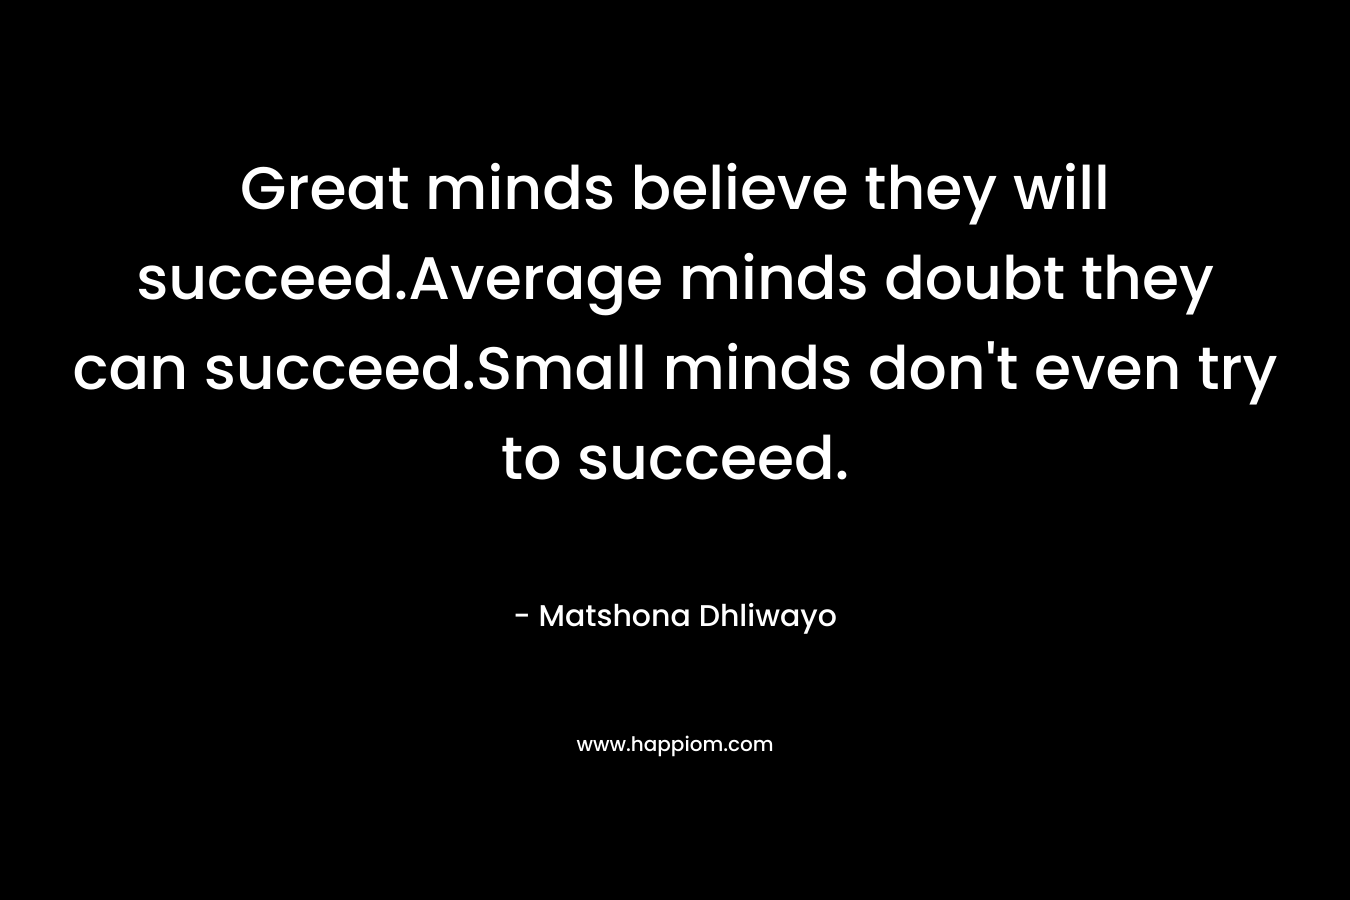 Great minds believe they will succeed.Average minds doubt they can succeed.Small minds don’t even try to succeed. – Matshona Dhliwayo